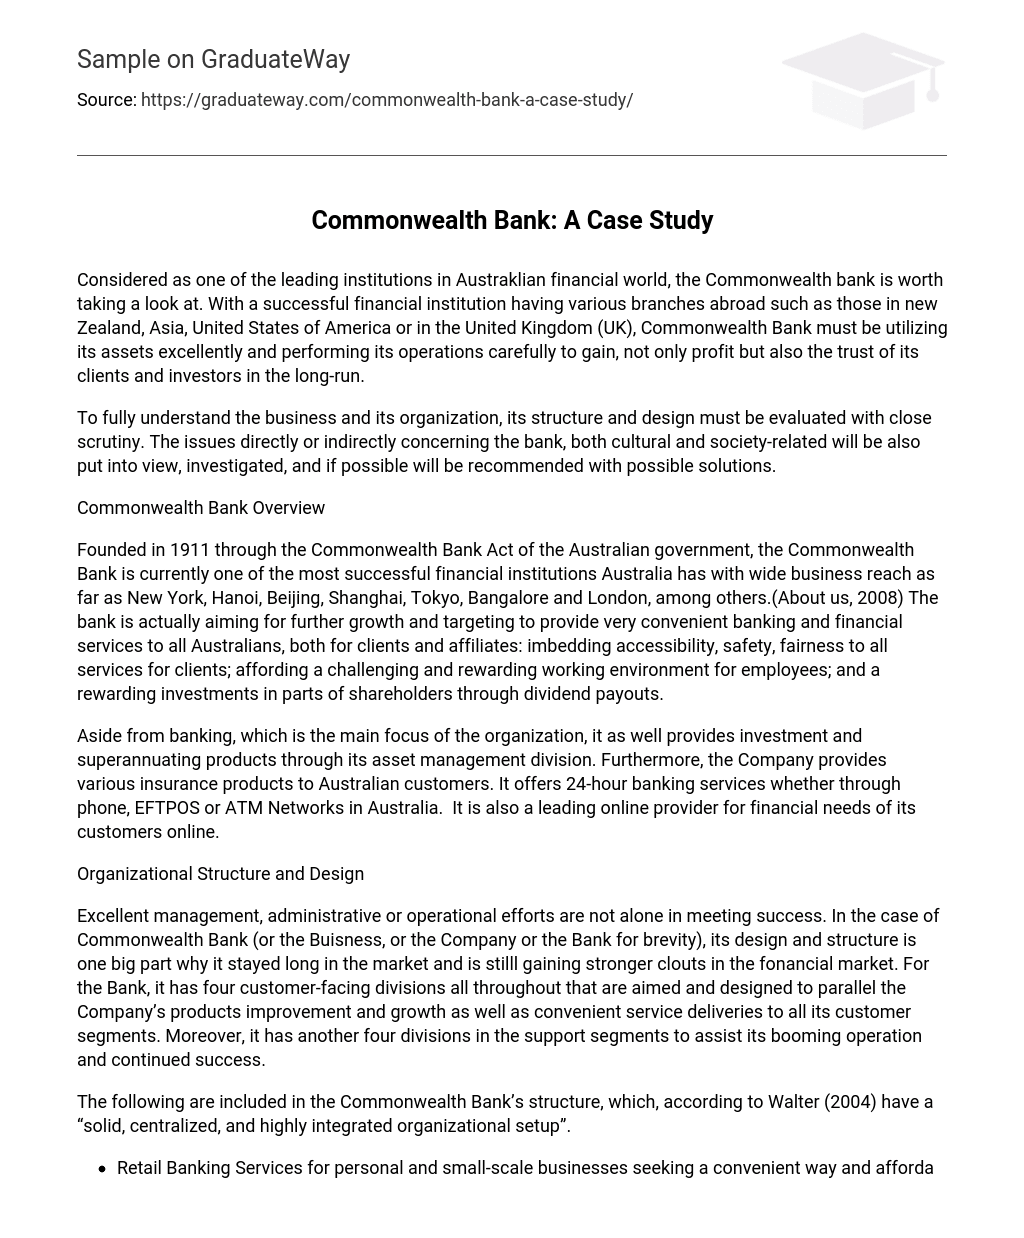 Commonwealth Bank: A Case Study